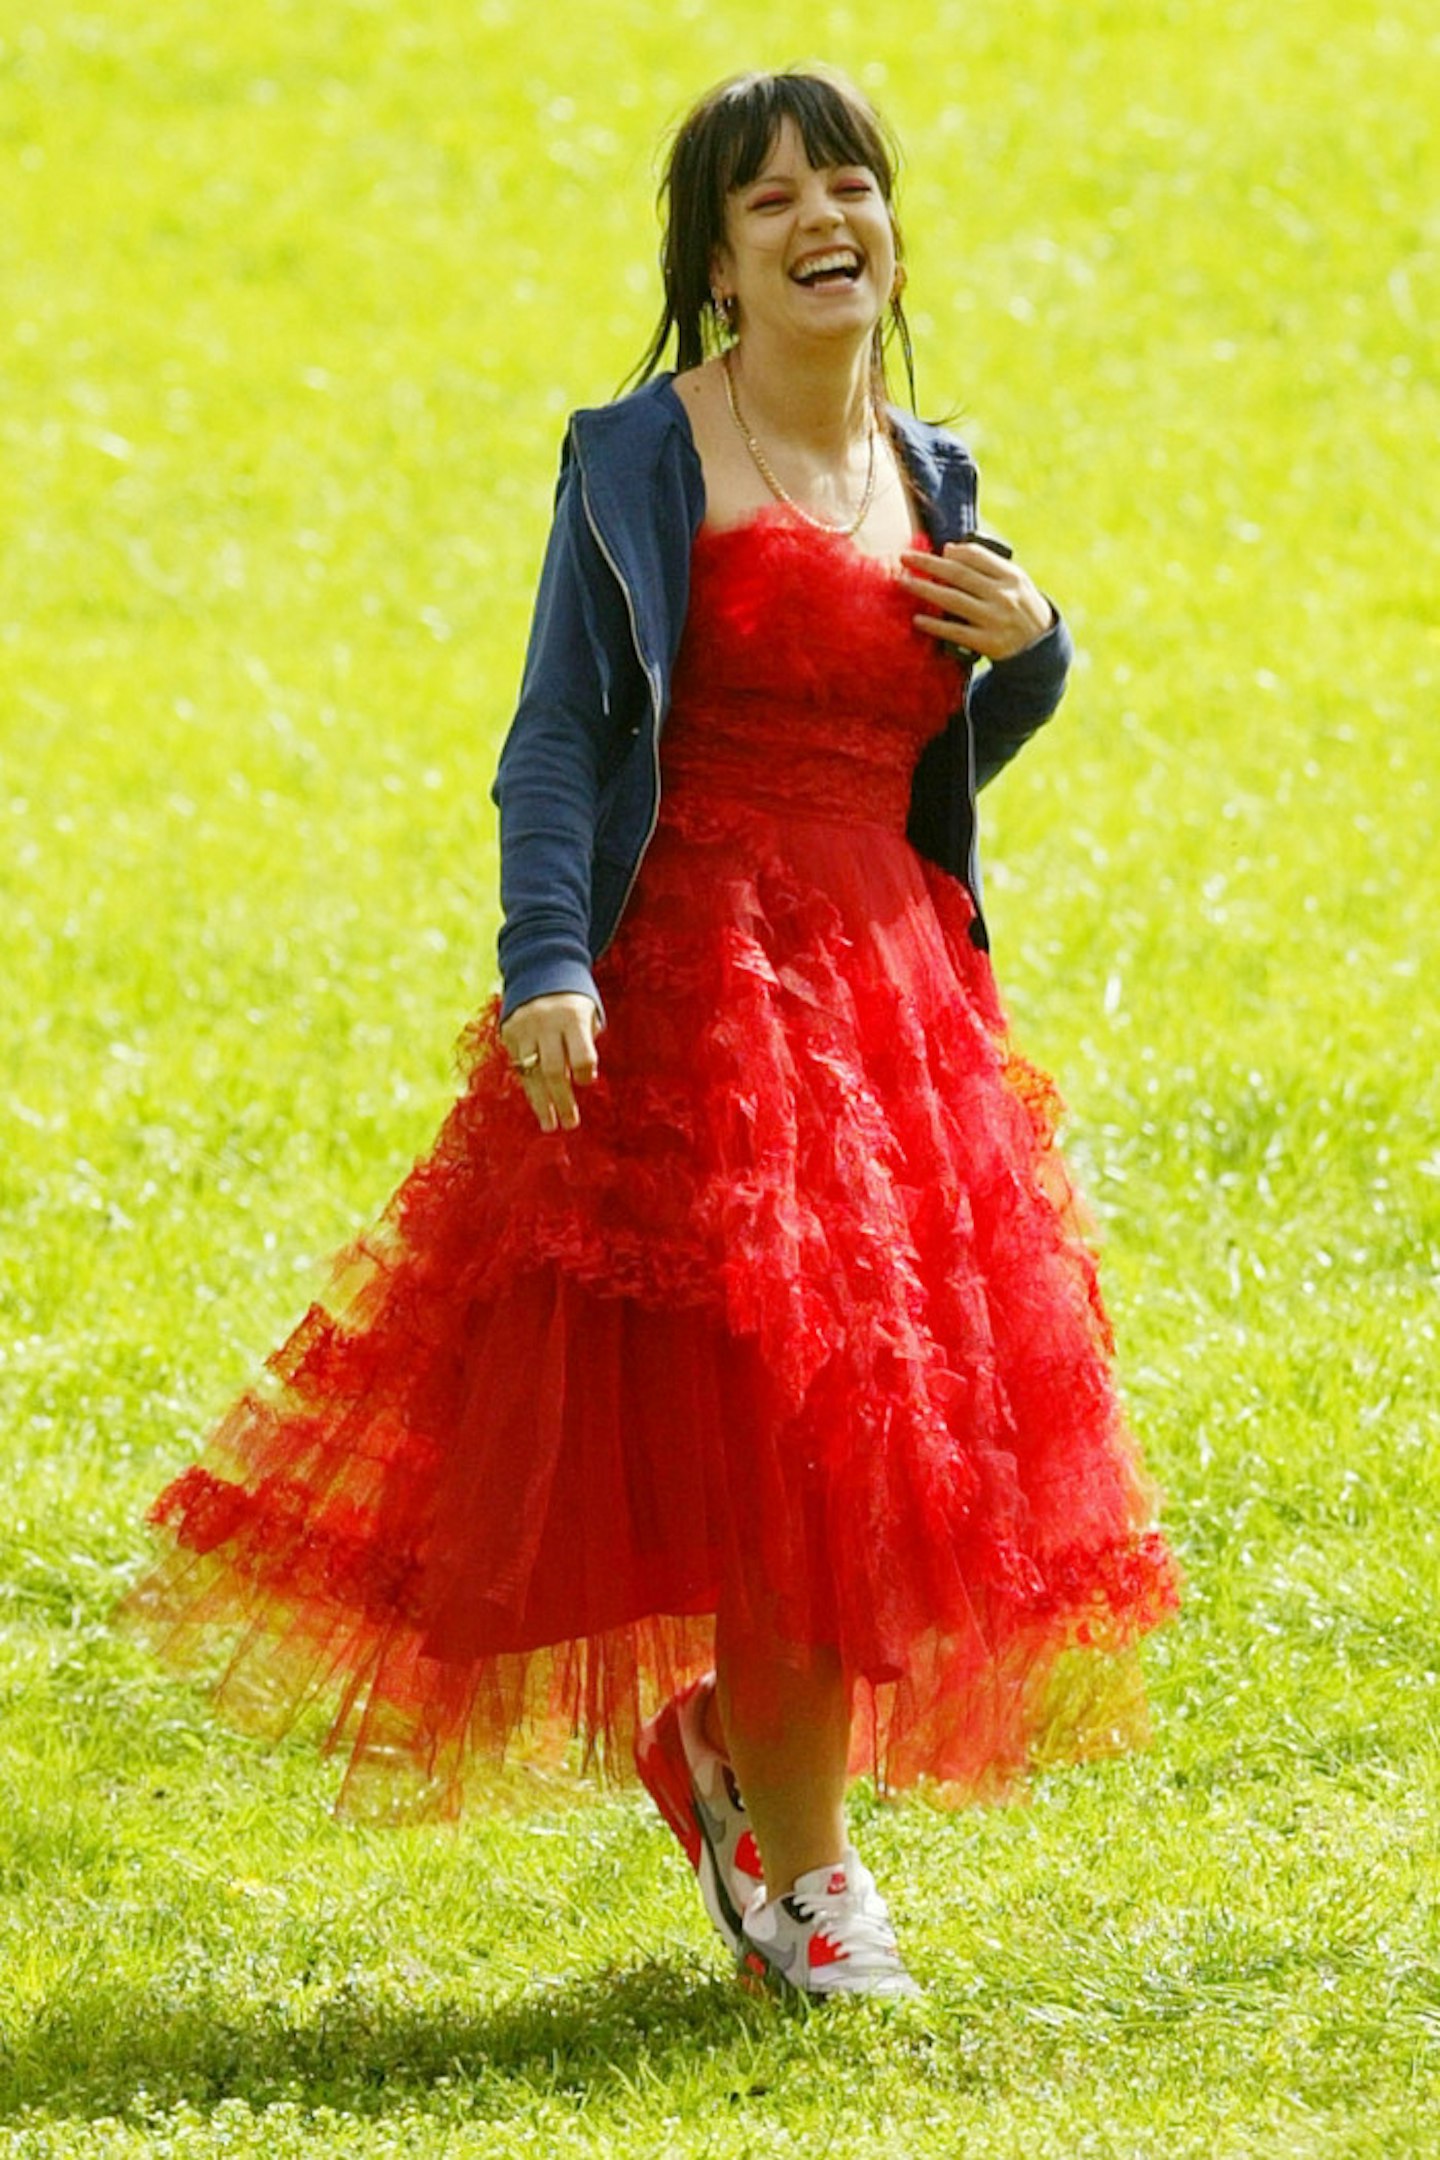 Lily Allen doing her typical prom dress and trainers look, 2005